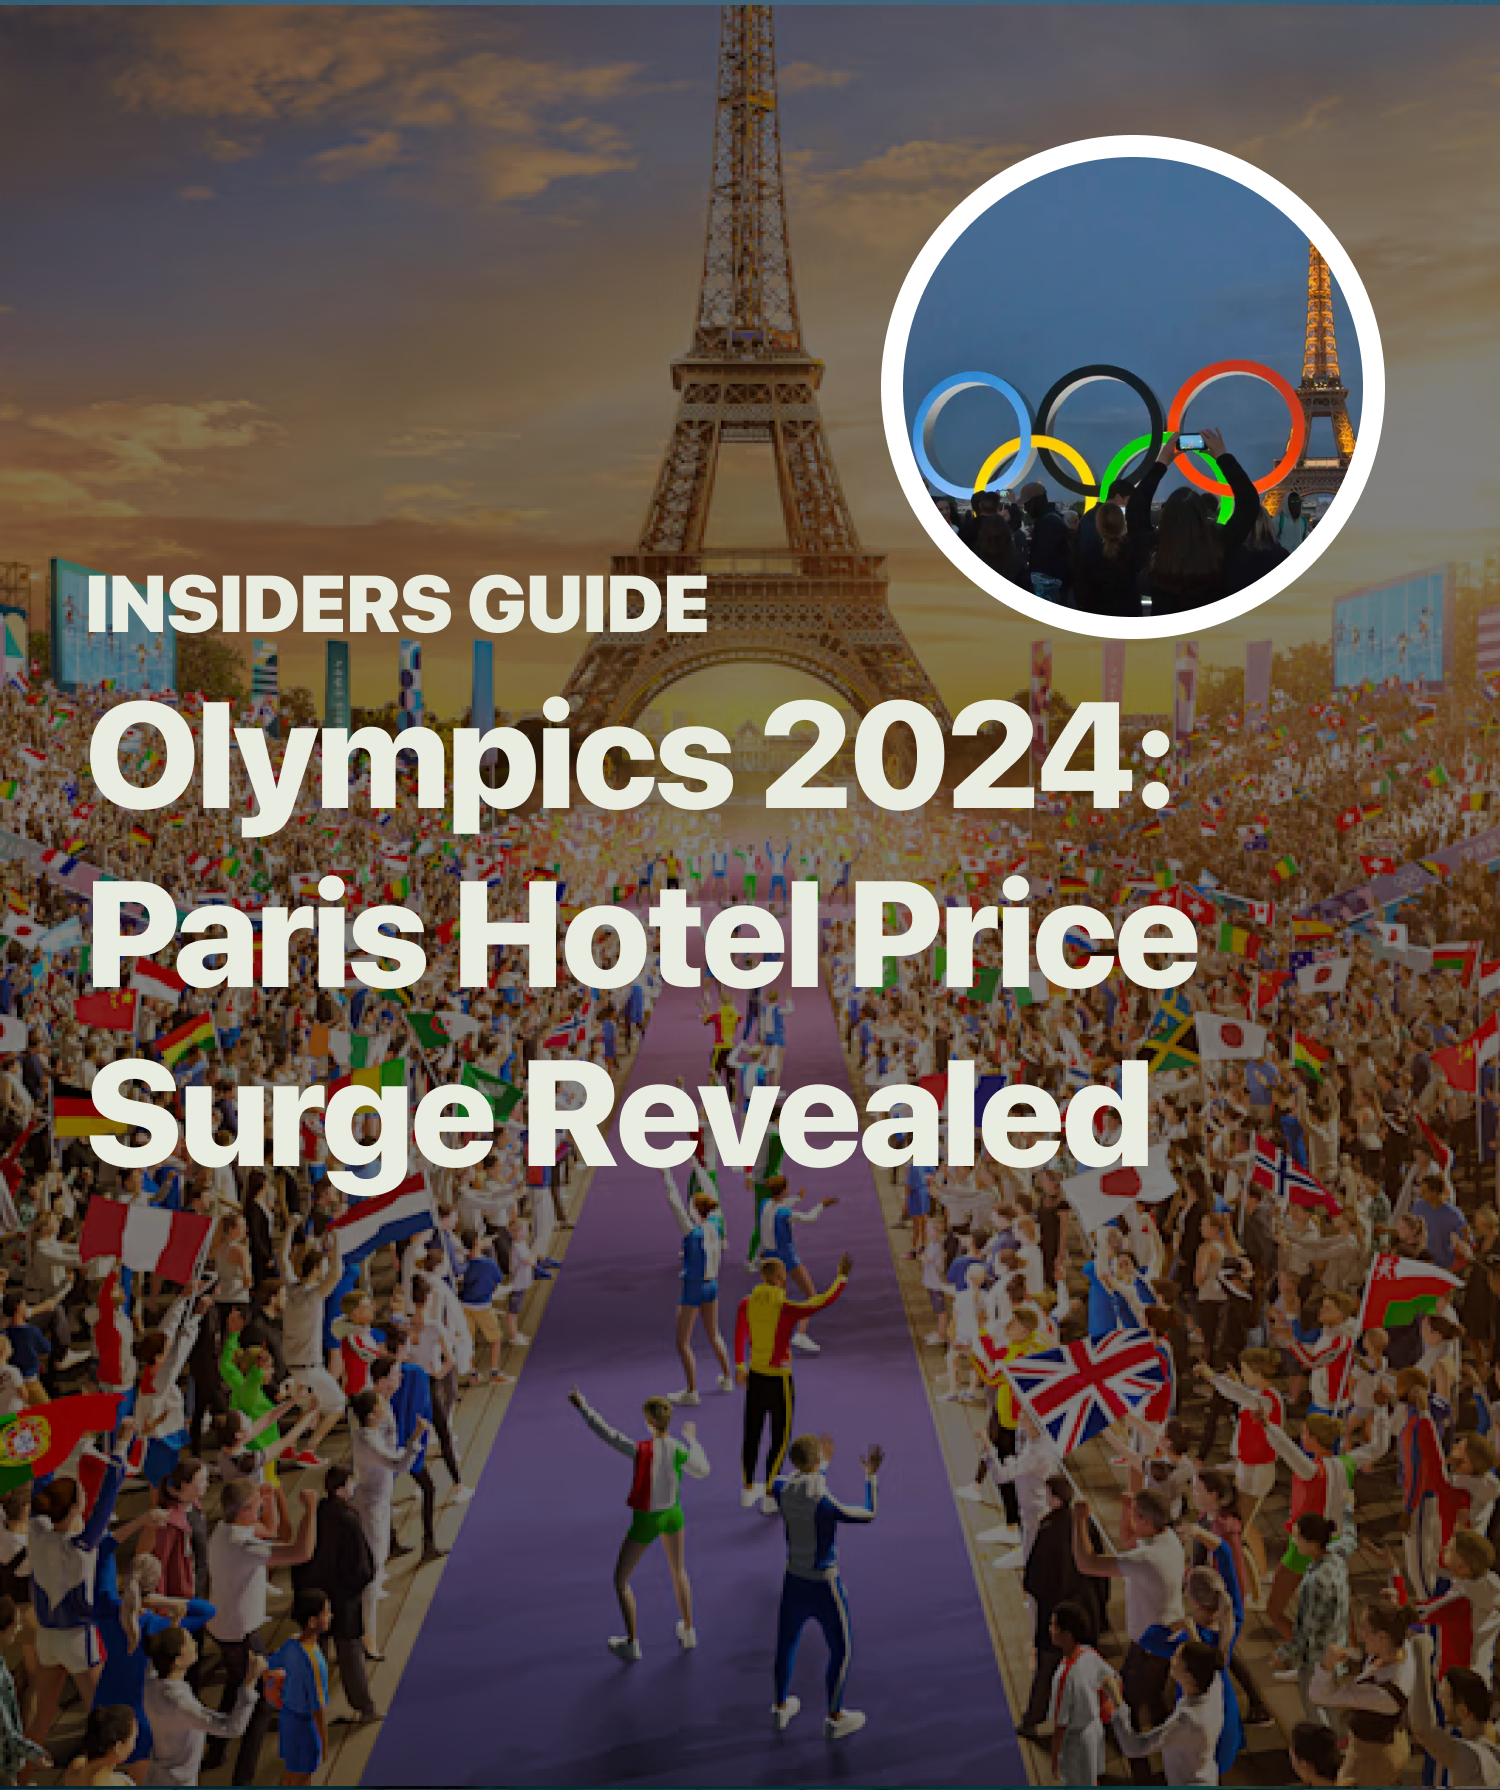 Paris Hotel Prices Surge 92.4% for the Olympics: A Comprehensive Analysis post image